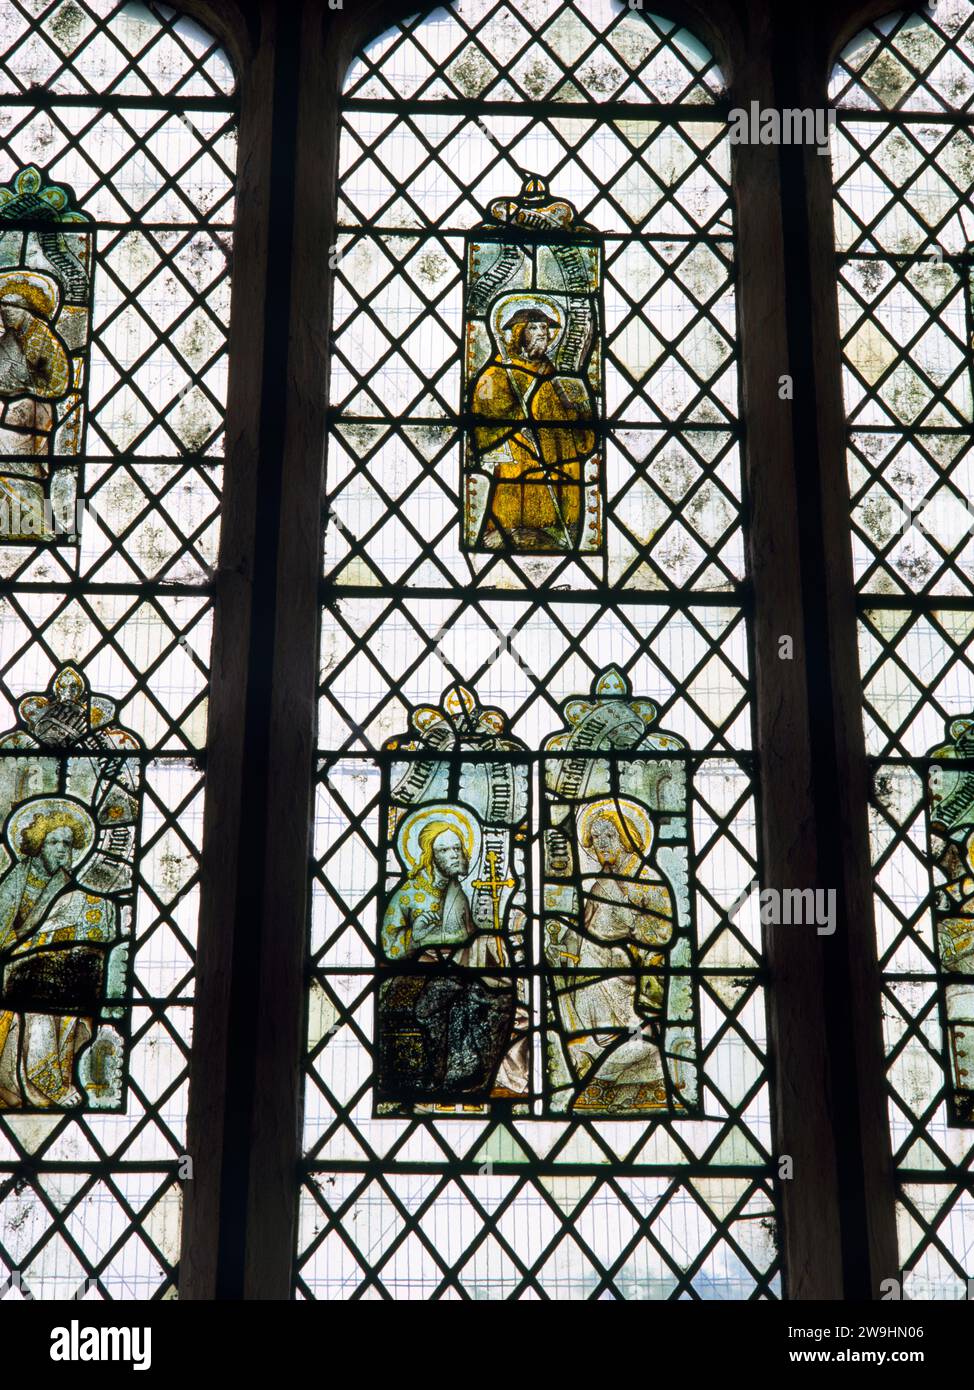 Medieval stained glass from Hailes Abbey placed in the E window of Hailes Church, Gloucestershire, England, UK: C15th depictions of apostles & saints. Stock Photo